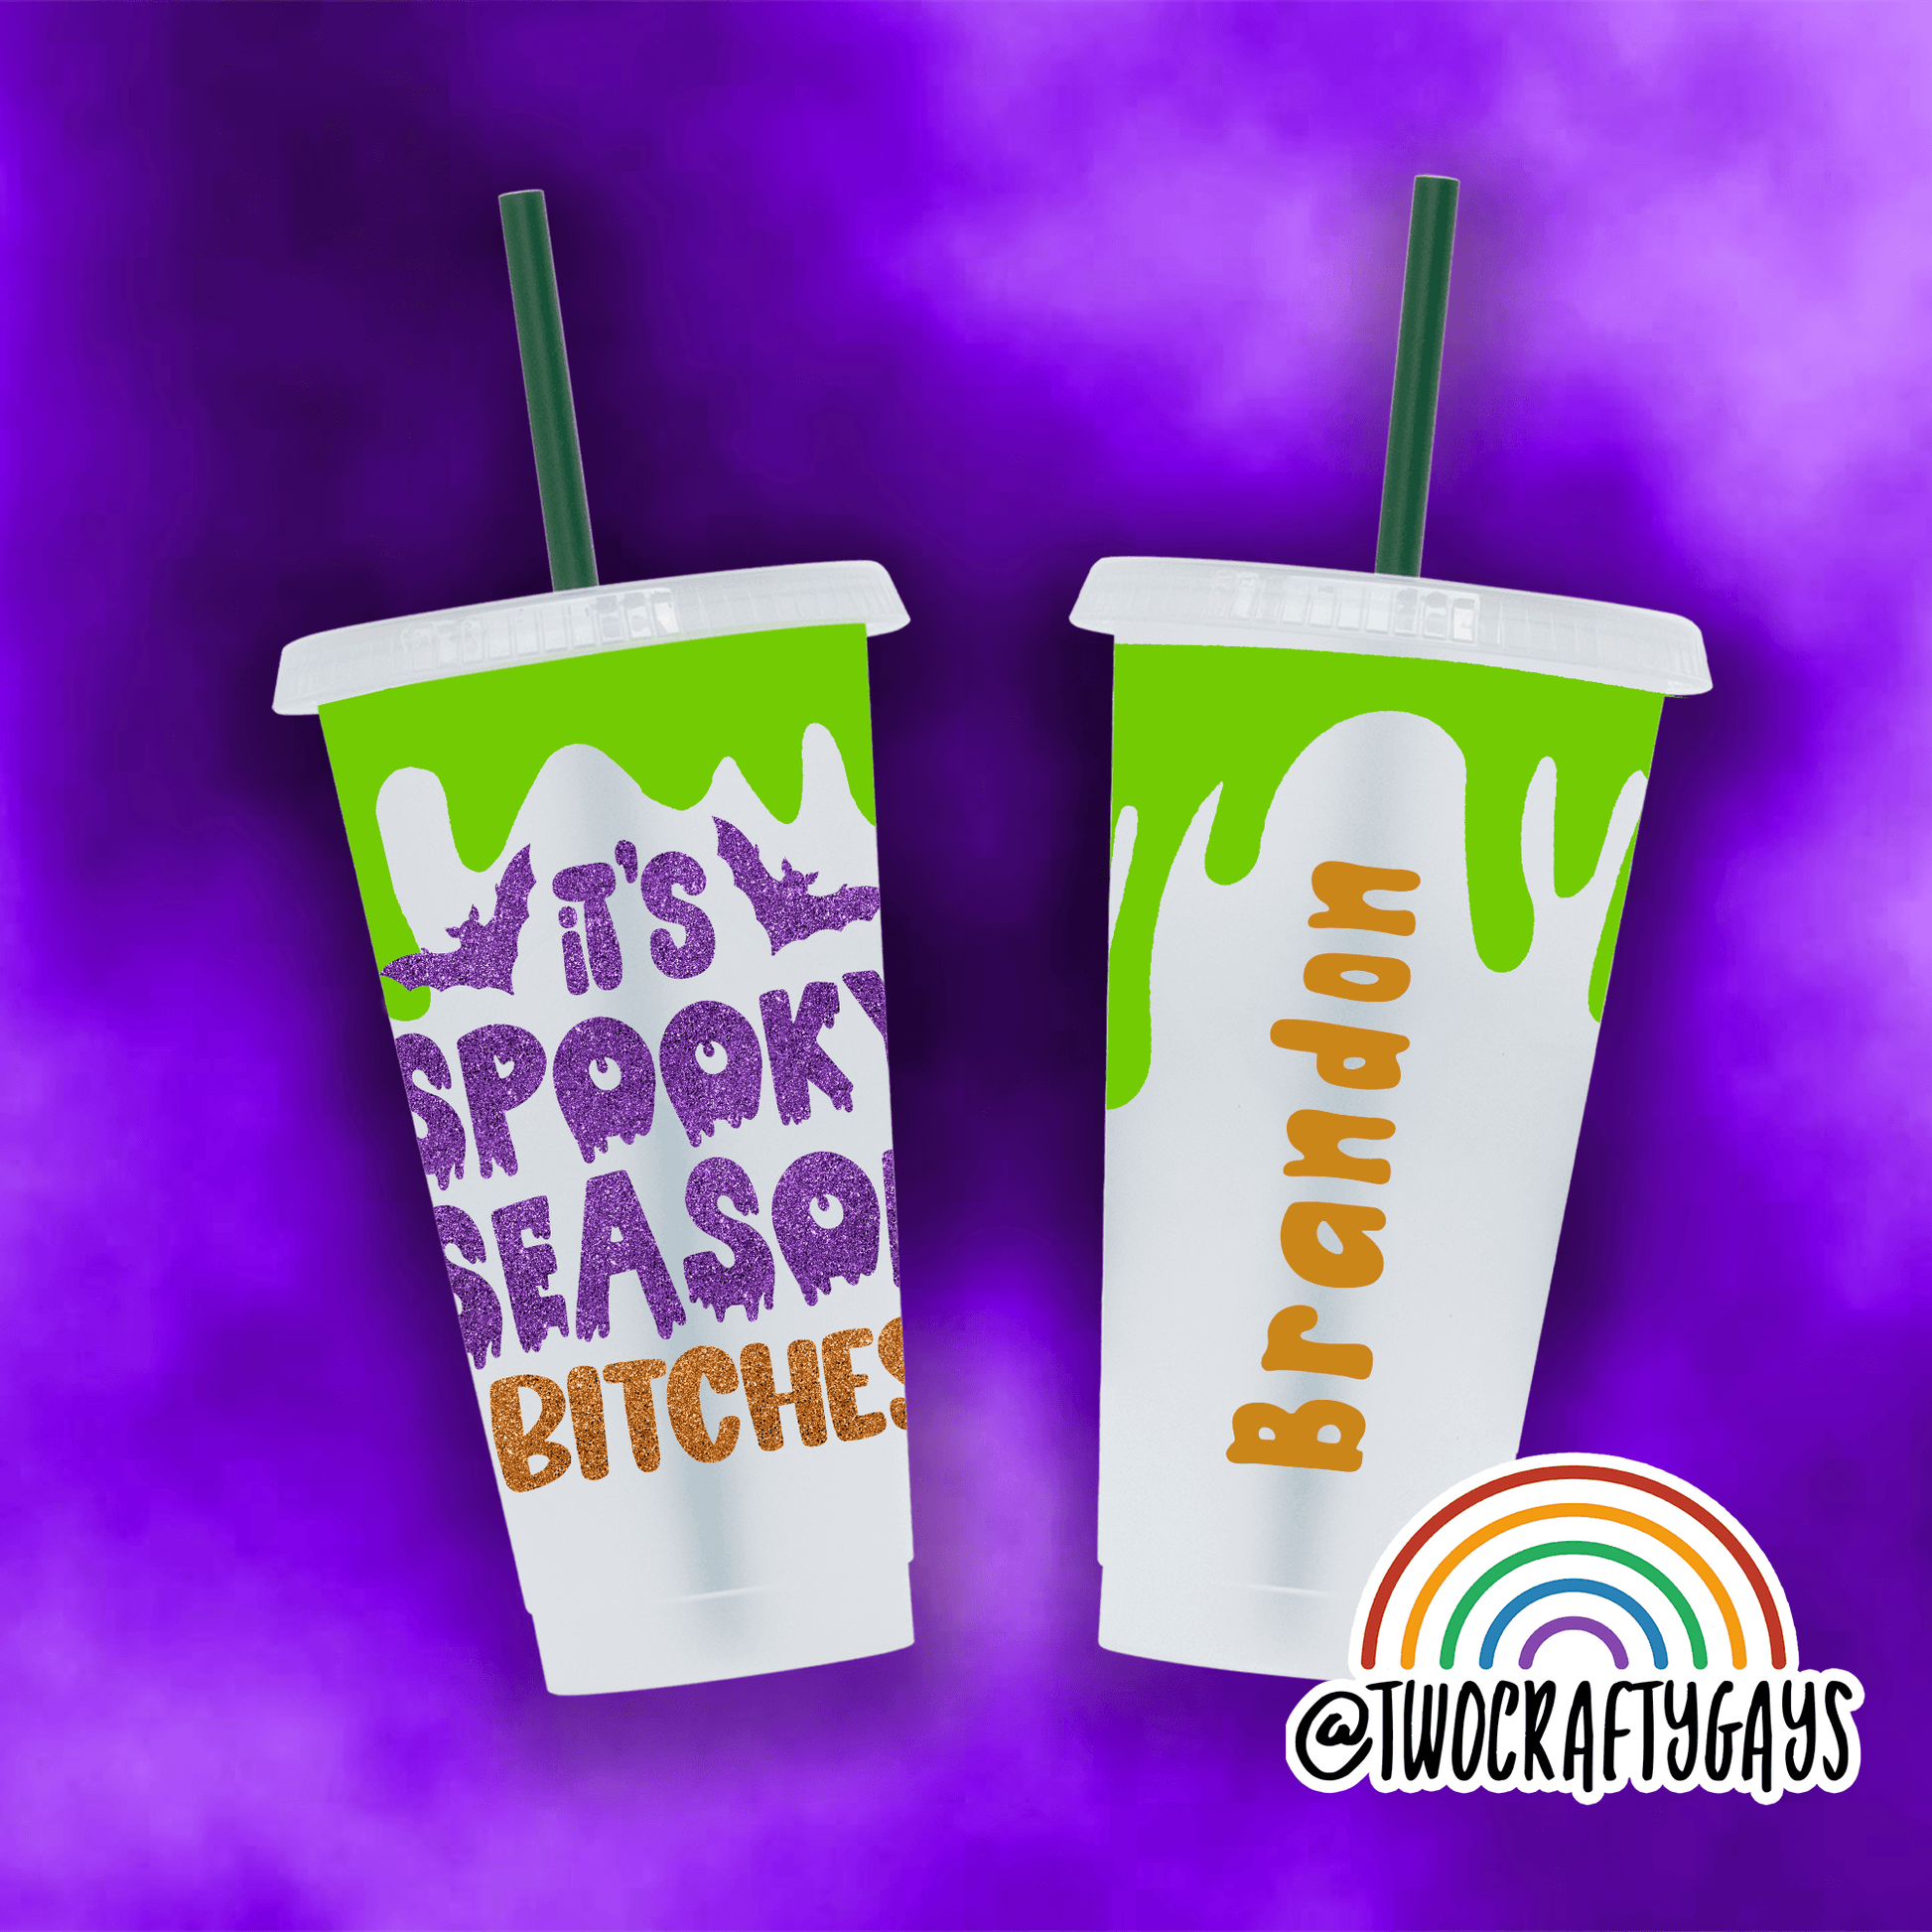 Spooky Season Bitches Personalized Tumbler Cup - Two Crafty Gays